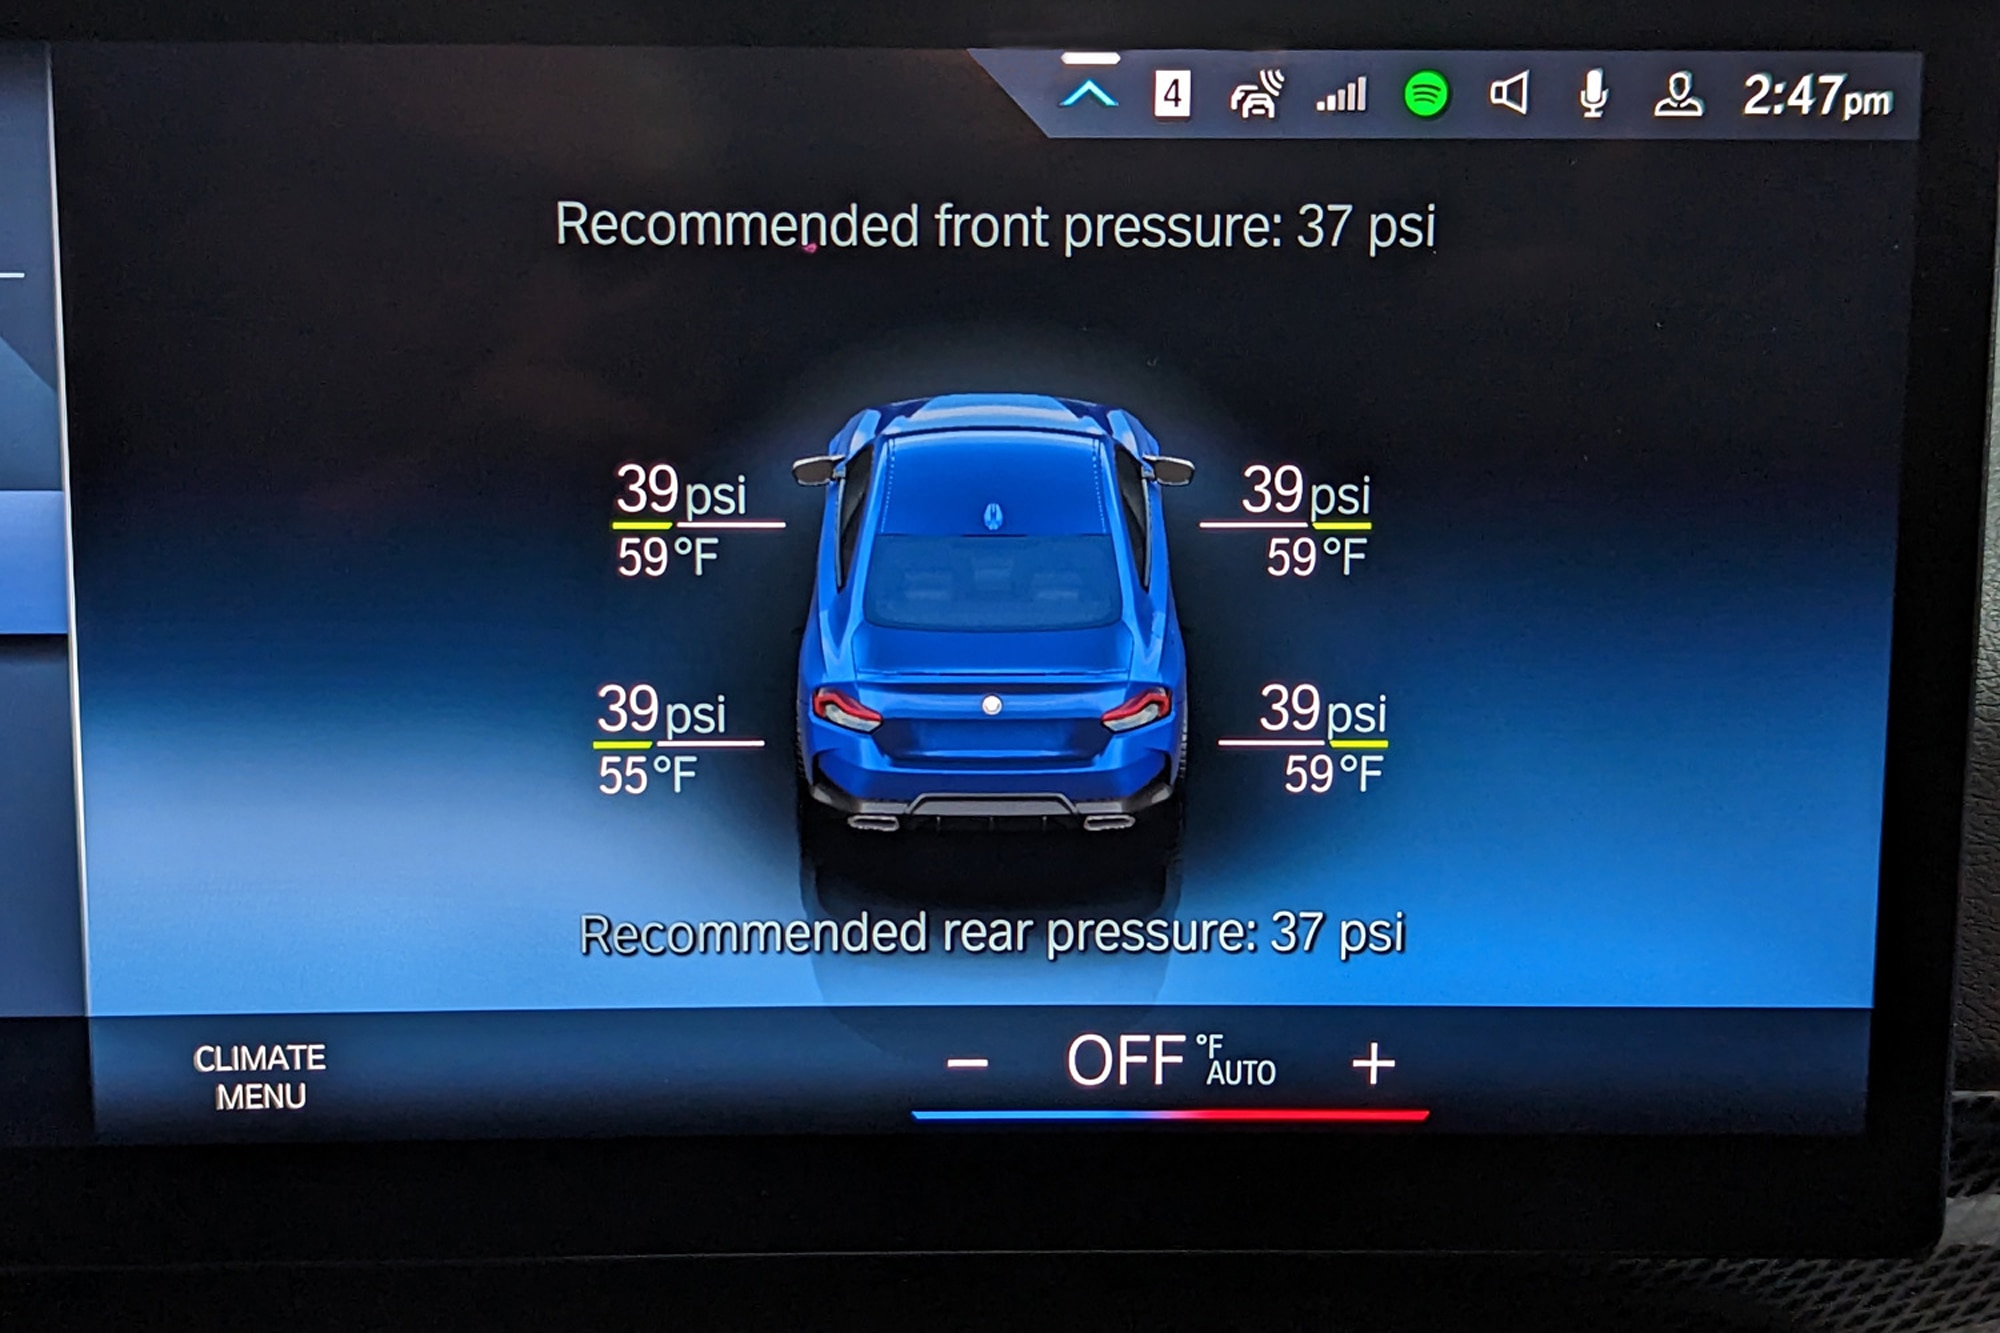 Tire pressure monitoring system on BMW dashboard